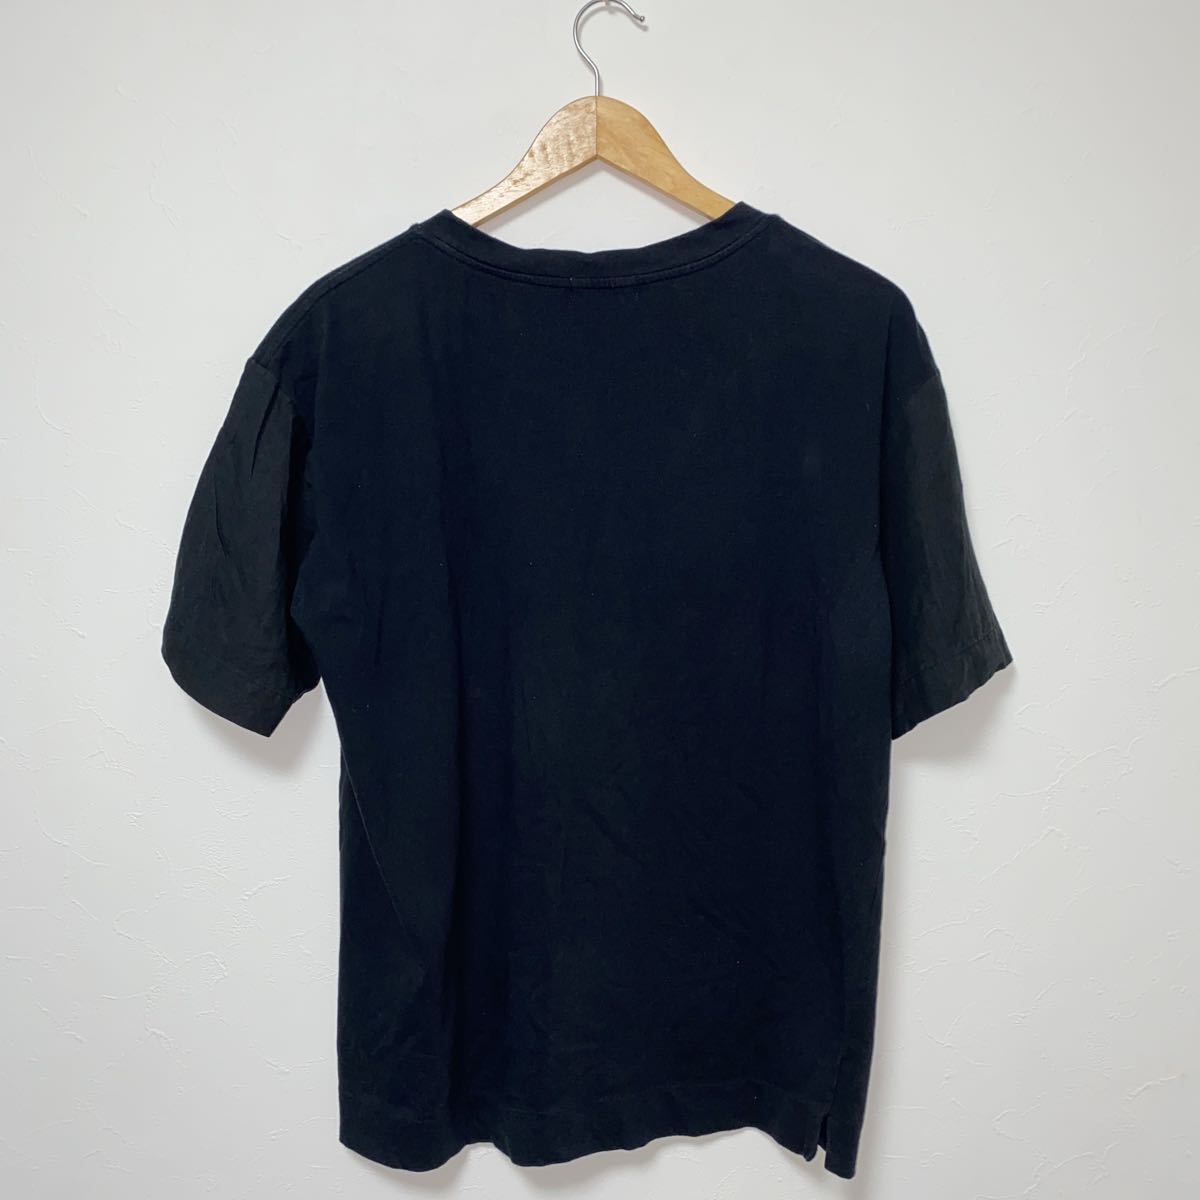  regular goods MARGARET HOWELL Margaret Howell short sleeves sleeve linen switch T-shirt cut and sewn black black M size cotton flax made in Japan men's 